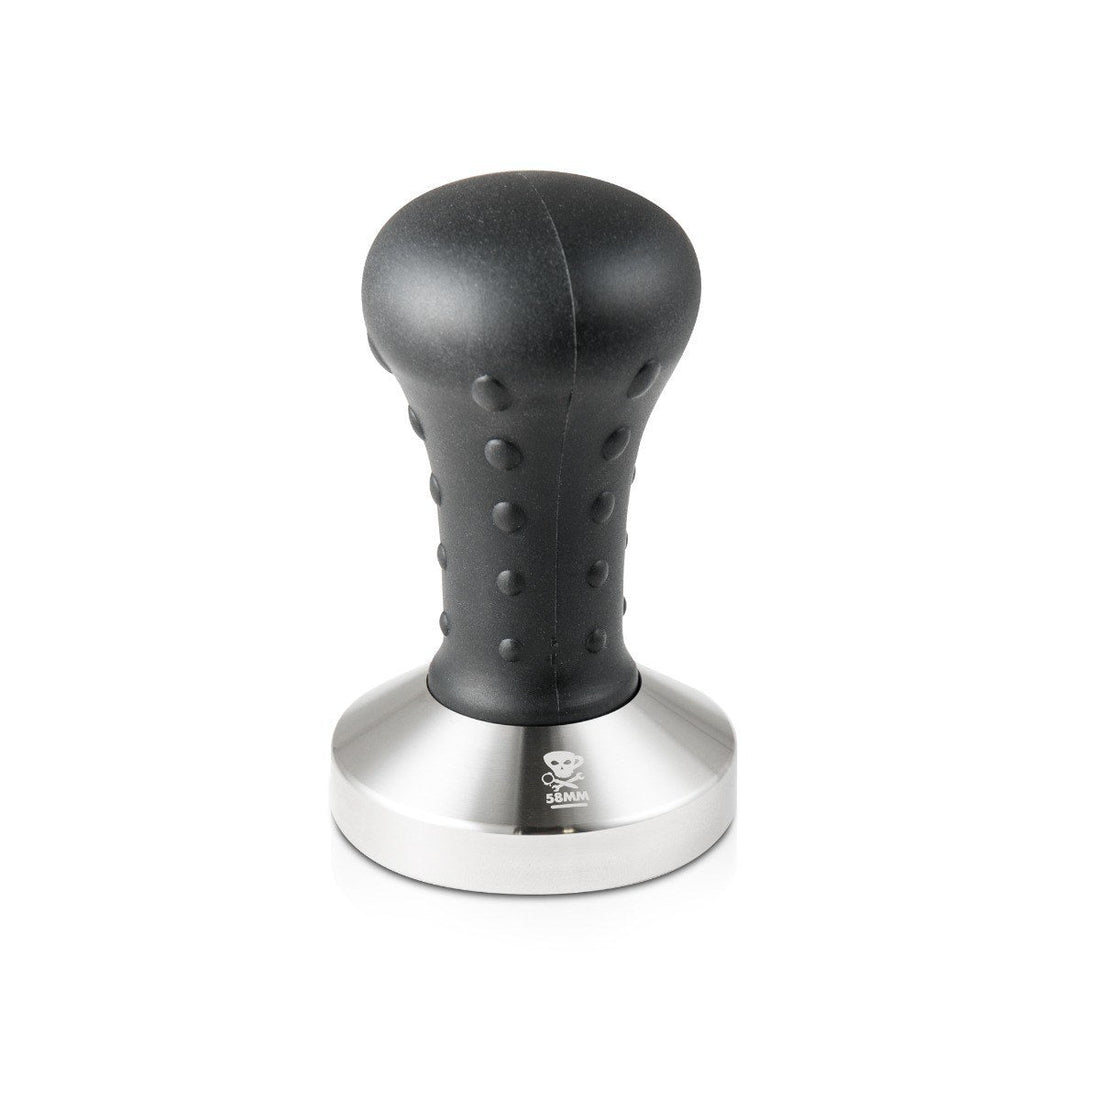 58mm flat tamper with textured handle